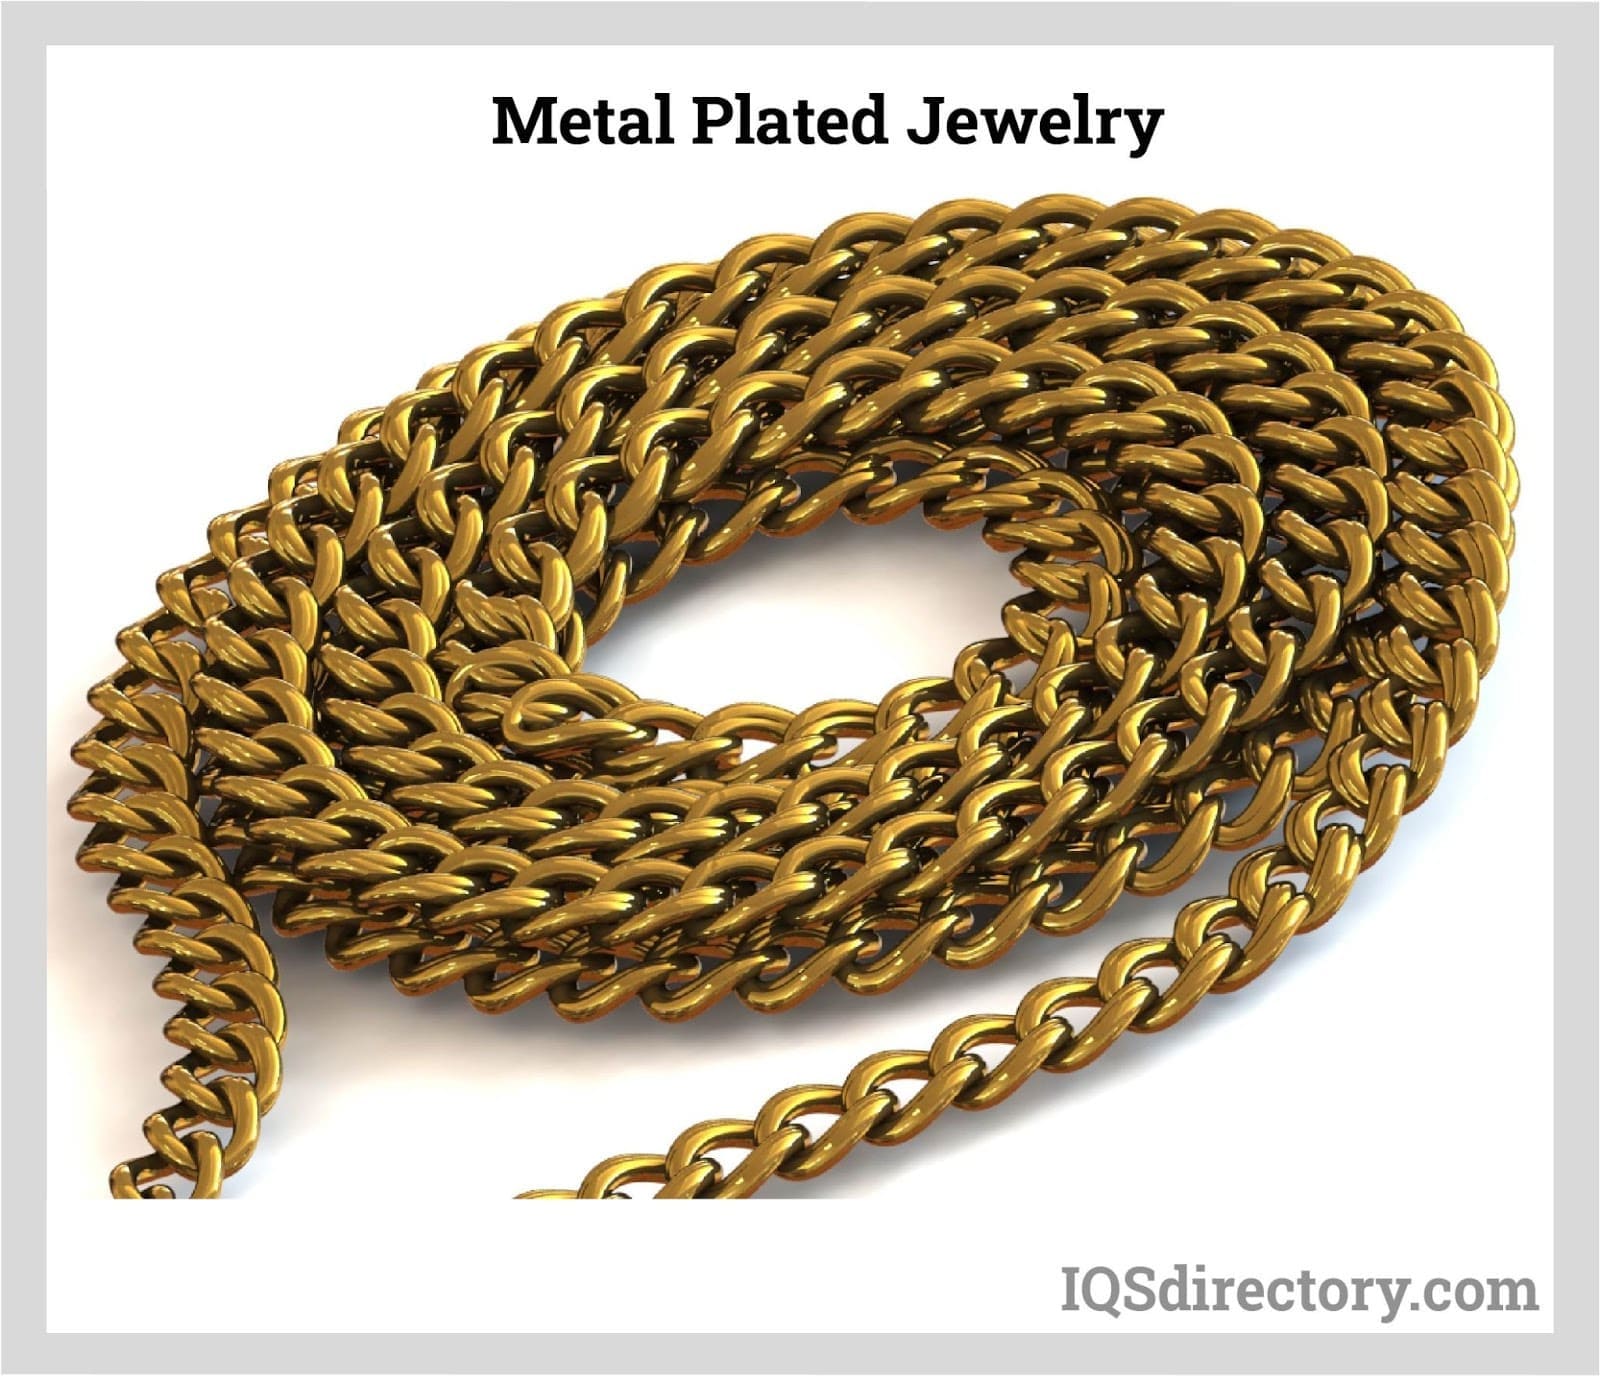 Metal Plated Jewelry